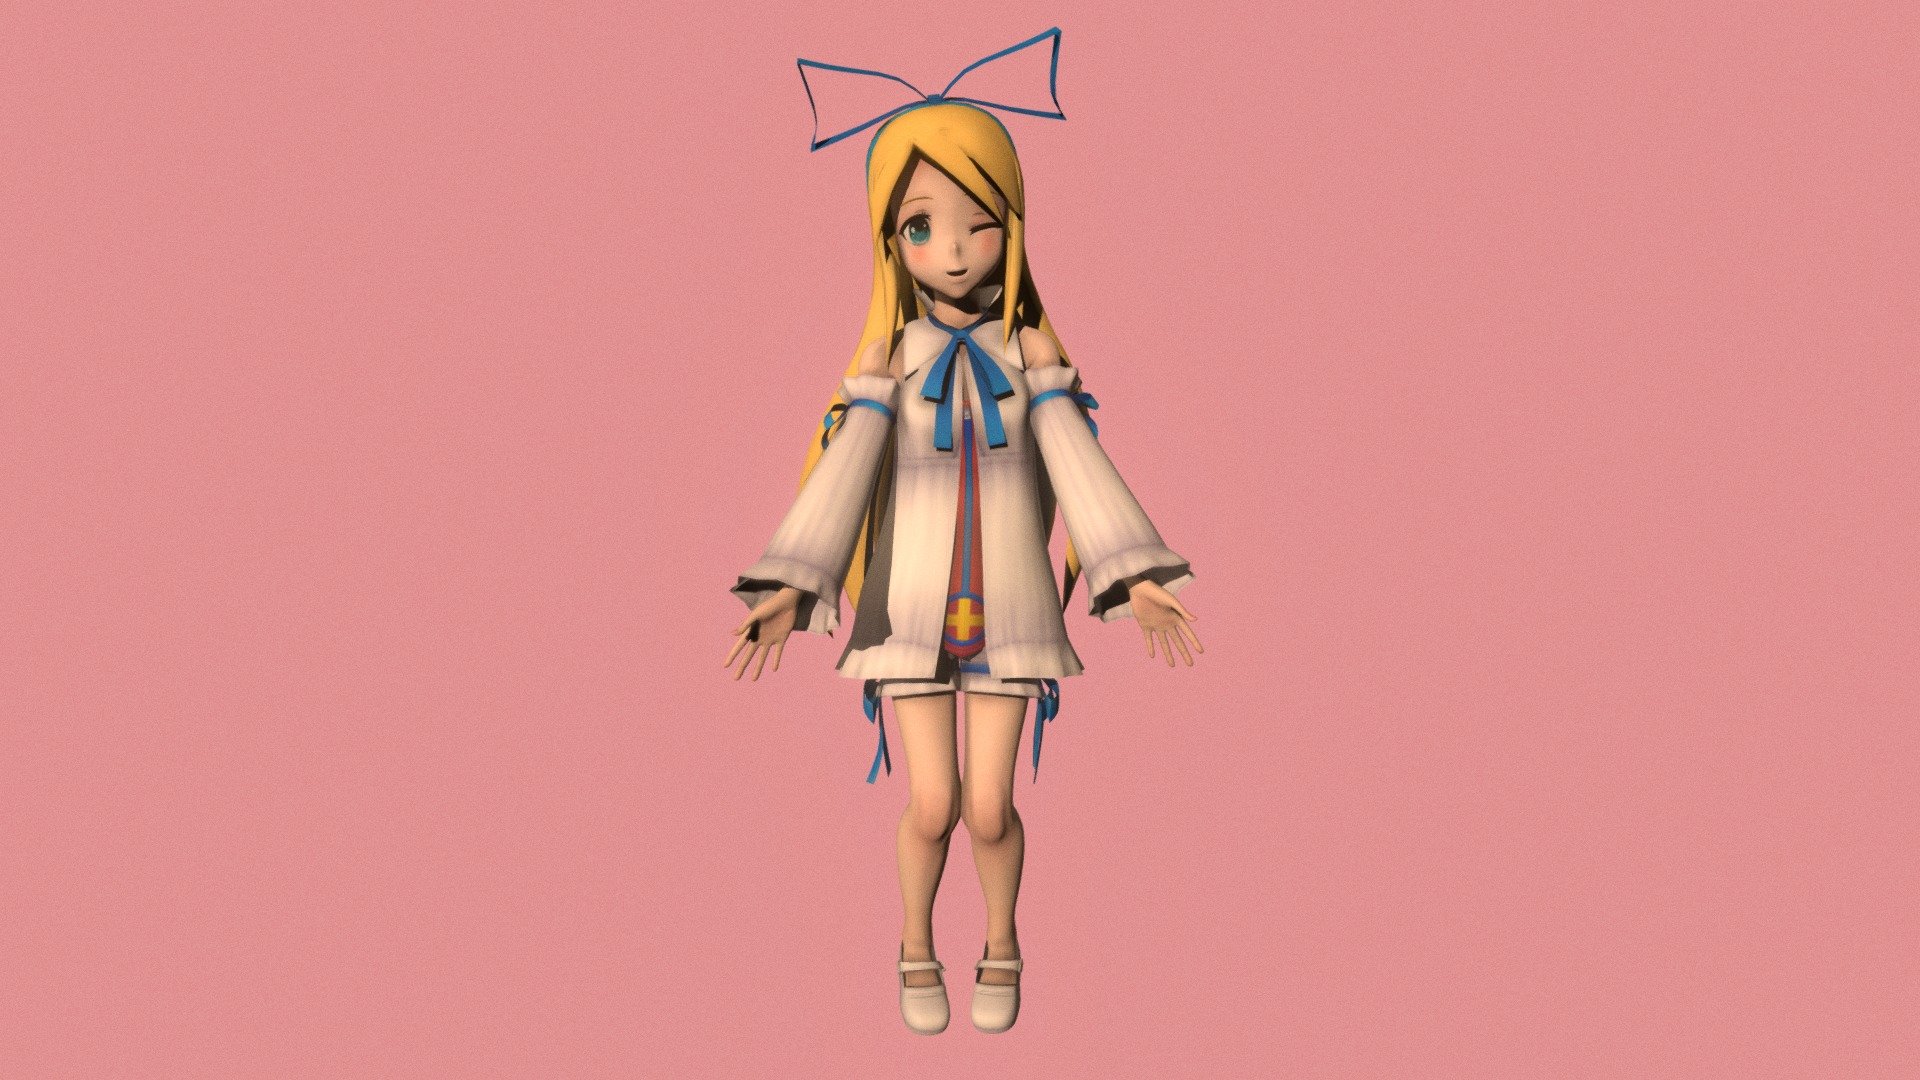 Posed model of anime girl Flonne (Disgaea).

This product include .FBX (ver. 7200) and .MAX (ver. 2010) files.

I support convert this 3D model to various file formats: 3DS; AI; ASE; DAE; DWF; DWG; DXF; FLT; HTR; IGS; M3G; MQO; OBJ; SAT; STL; W3D; WRL; X.

You can buy all of my models in one pack to save cost: https://sketchfab.com/3d-models/all-of-my-anime-girls-c5a56156994e4193b9e8fa21a3b8360b

And I can make commission models.

If you have any questions, please leave a comment 3d model